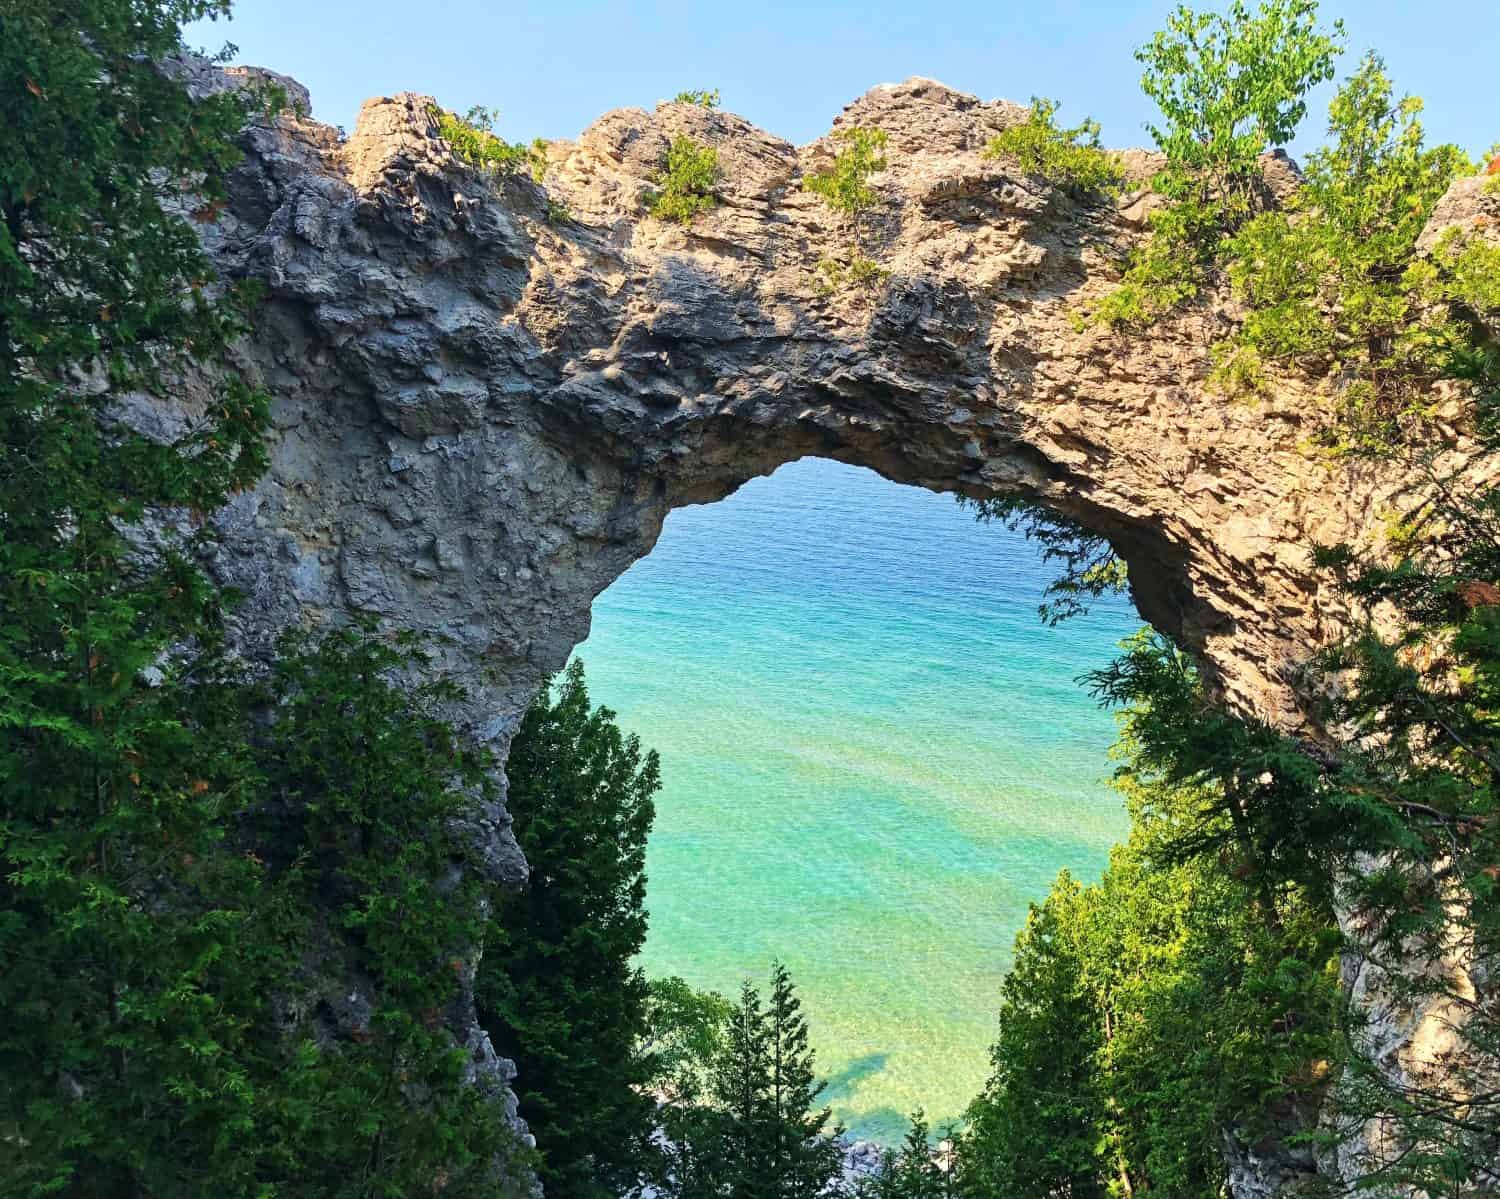 "Millennium's Arch" - Arch Rock in Mackinac Island State Park is a natural limestone formation. Taken in the beginning of summer, this declares a scenic view of Lake Huron through the Arch.